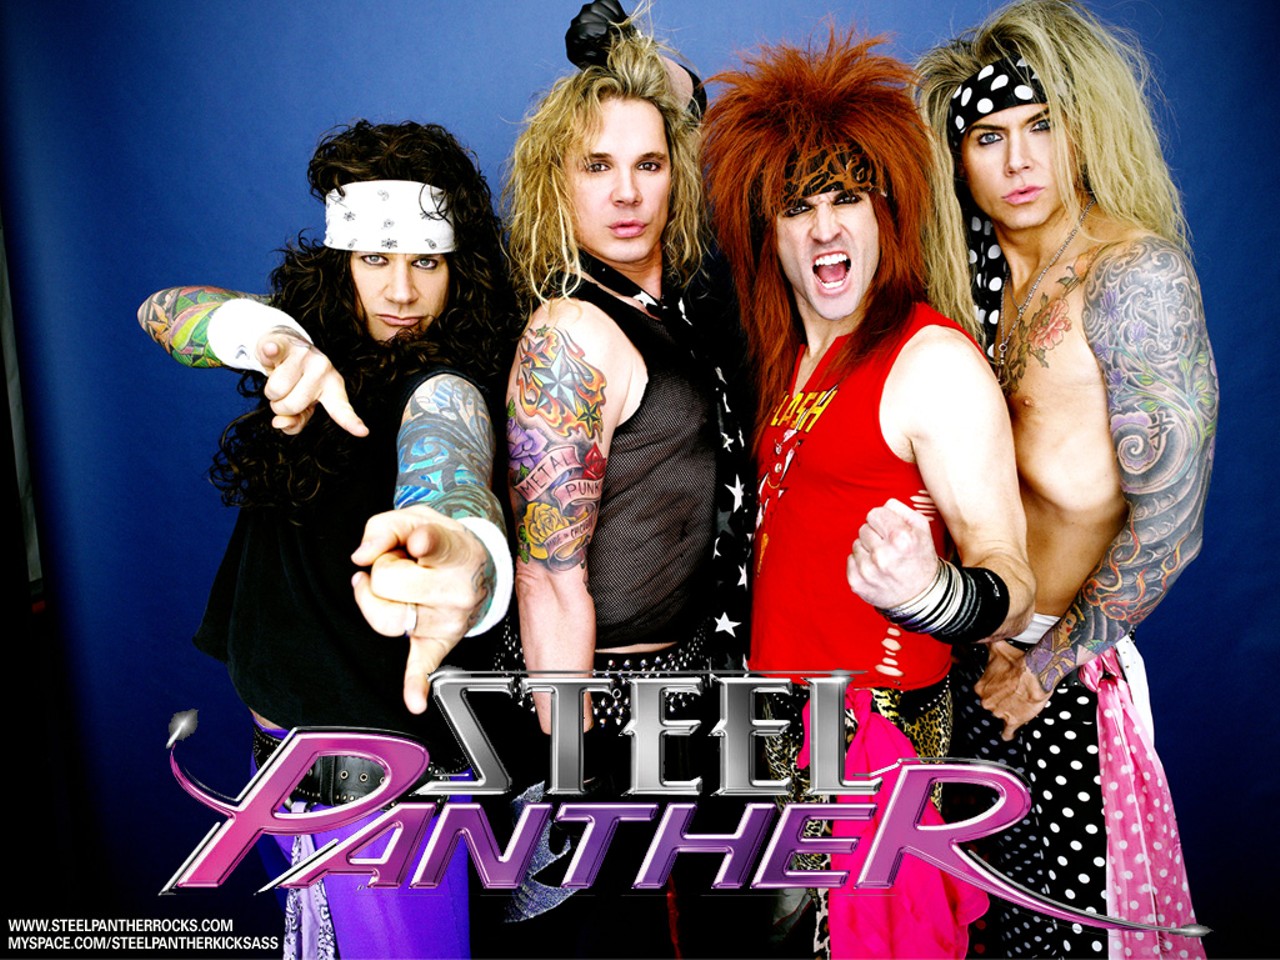 Steel Panther
12/21 at the Royal Oak Music Theatre, Royal Oak
If you’ve seen the Spinal Tap and Dewey Cox movies, you know that comedy music only works if the songs are really, really good. Satire falls on its face immediately if the writing isn’t strong. Thankfully, the dudes of Steel Panther know this. They have two albums chocka-full with fantastic bubblegum rock anthems, power ballads and filth. “My heart belongs to you, but my cock is community property,” they sing on “Community Property,” a romantic notion only bettered by “Fuck all Night and Party all Day.”